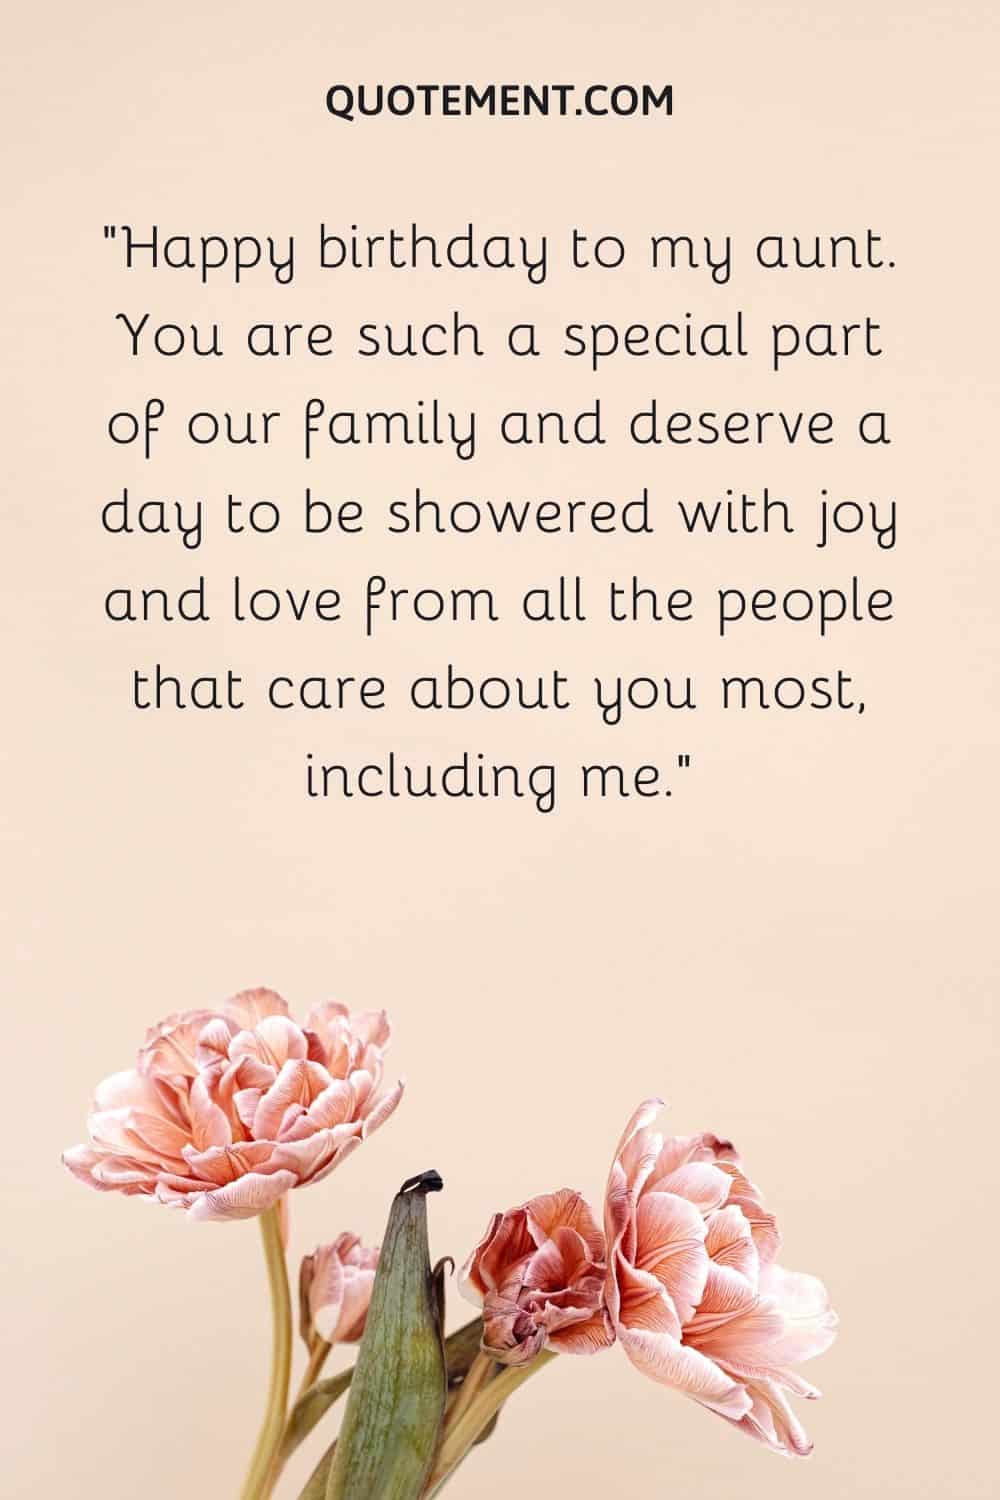 You are such a special part of our family and deserve a day to be showered with joy